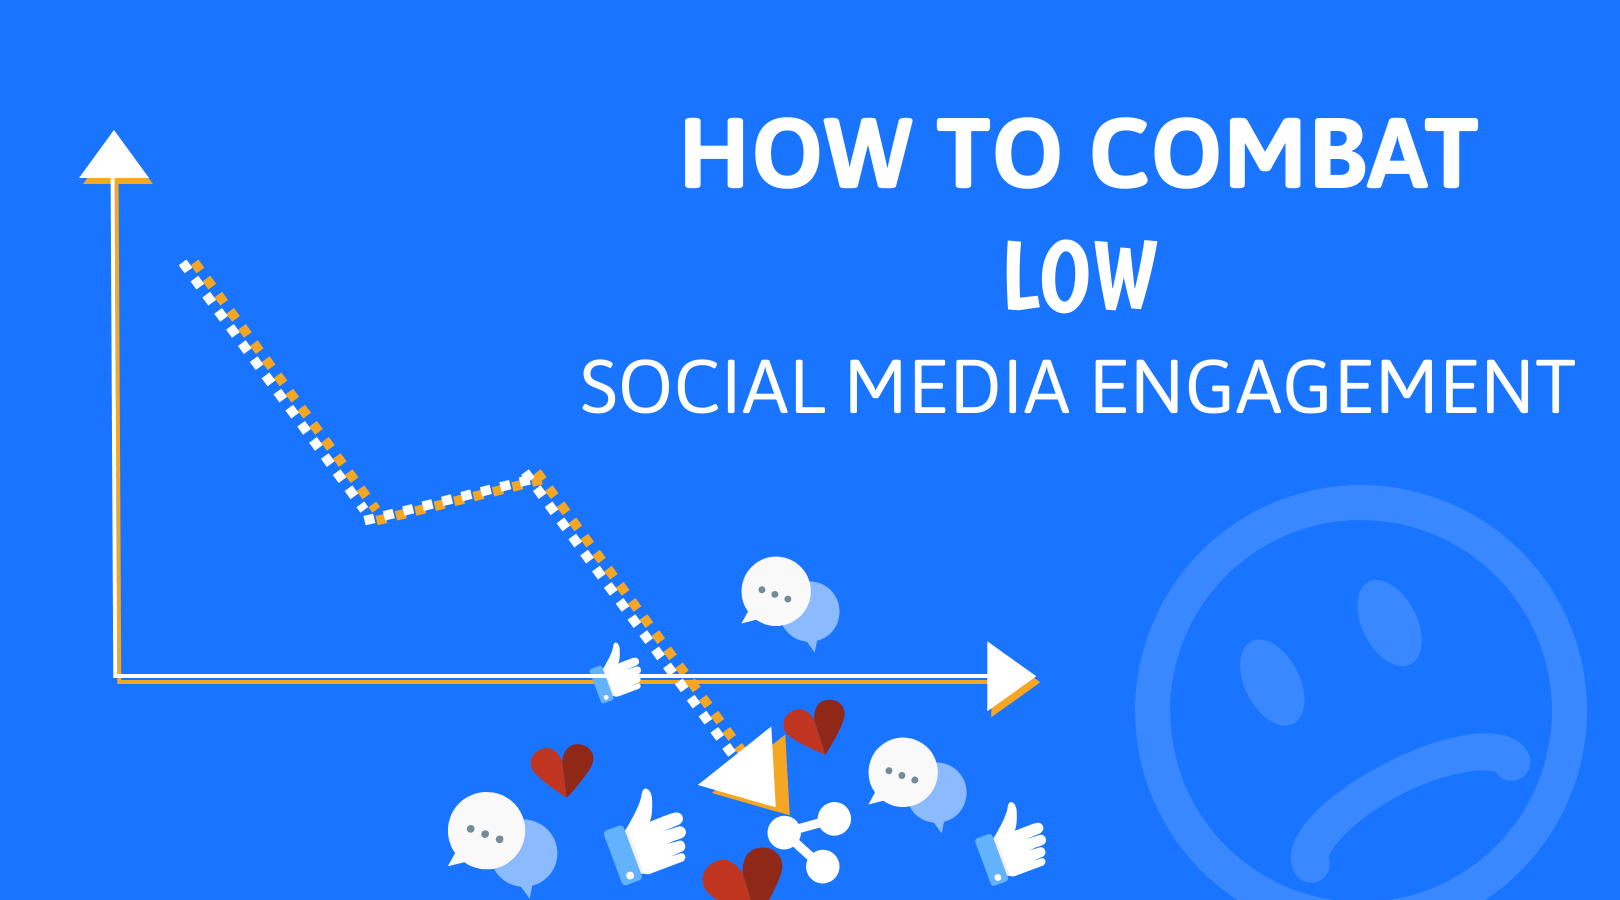 2 How to combat low social media engagement